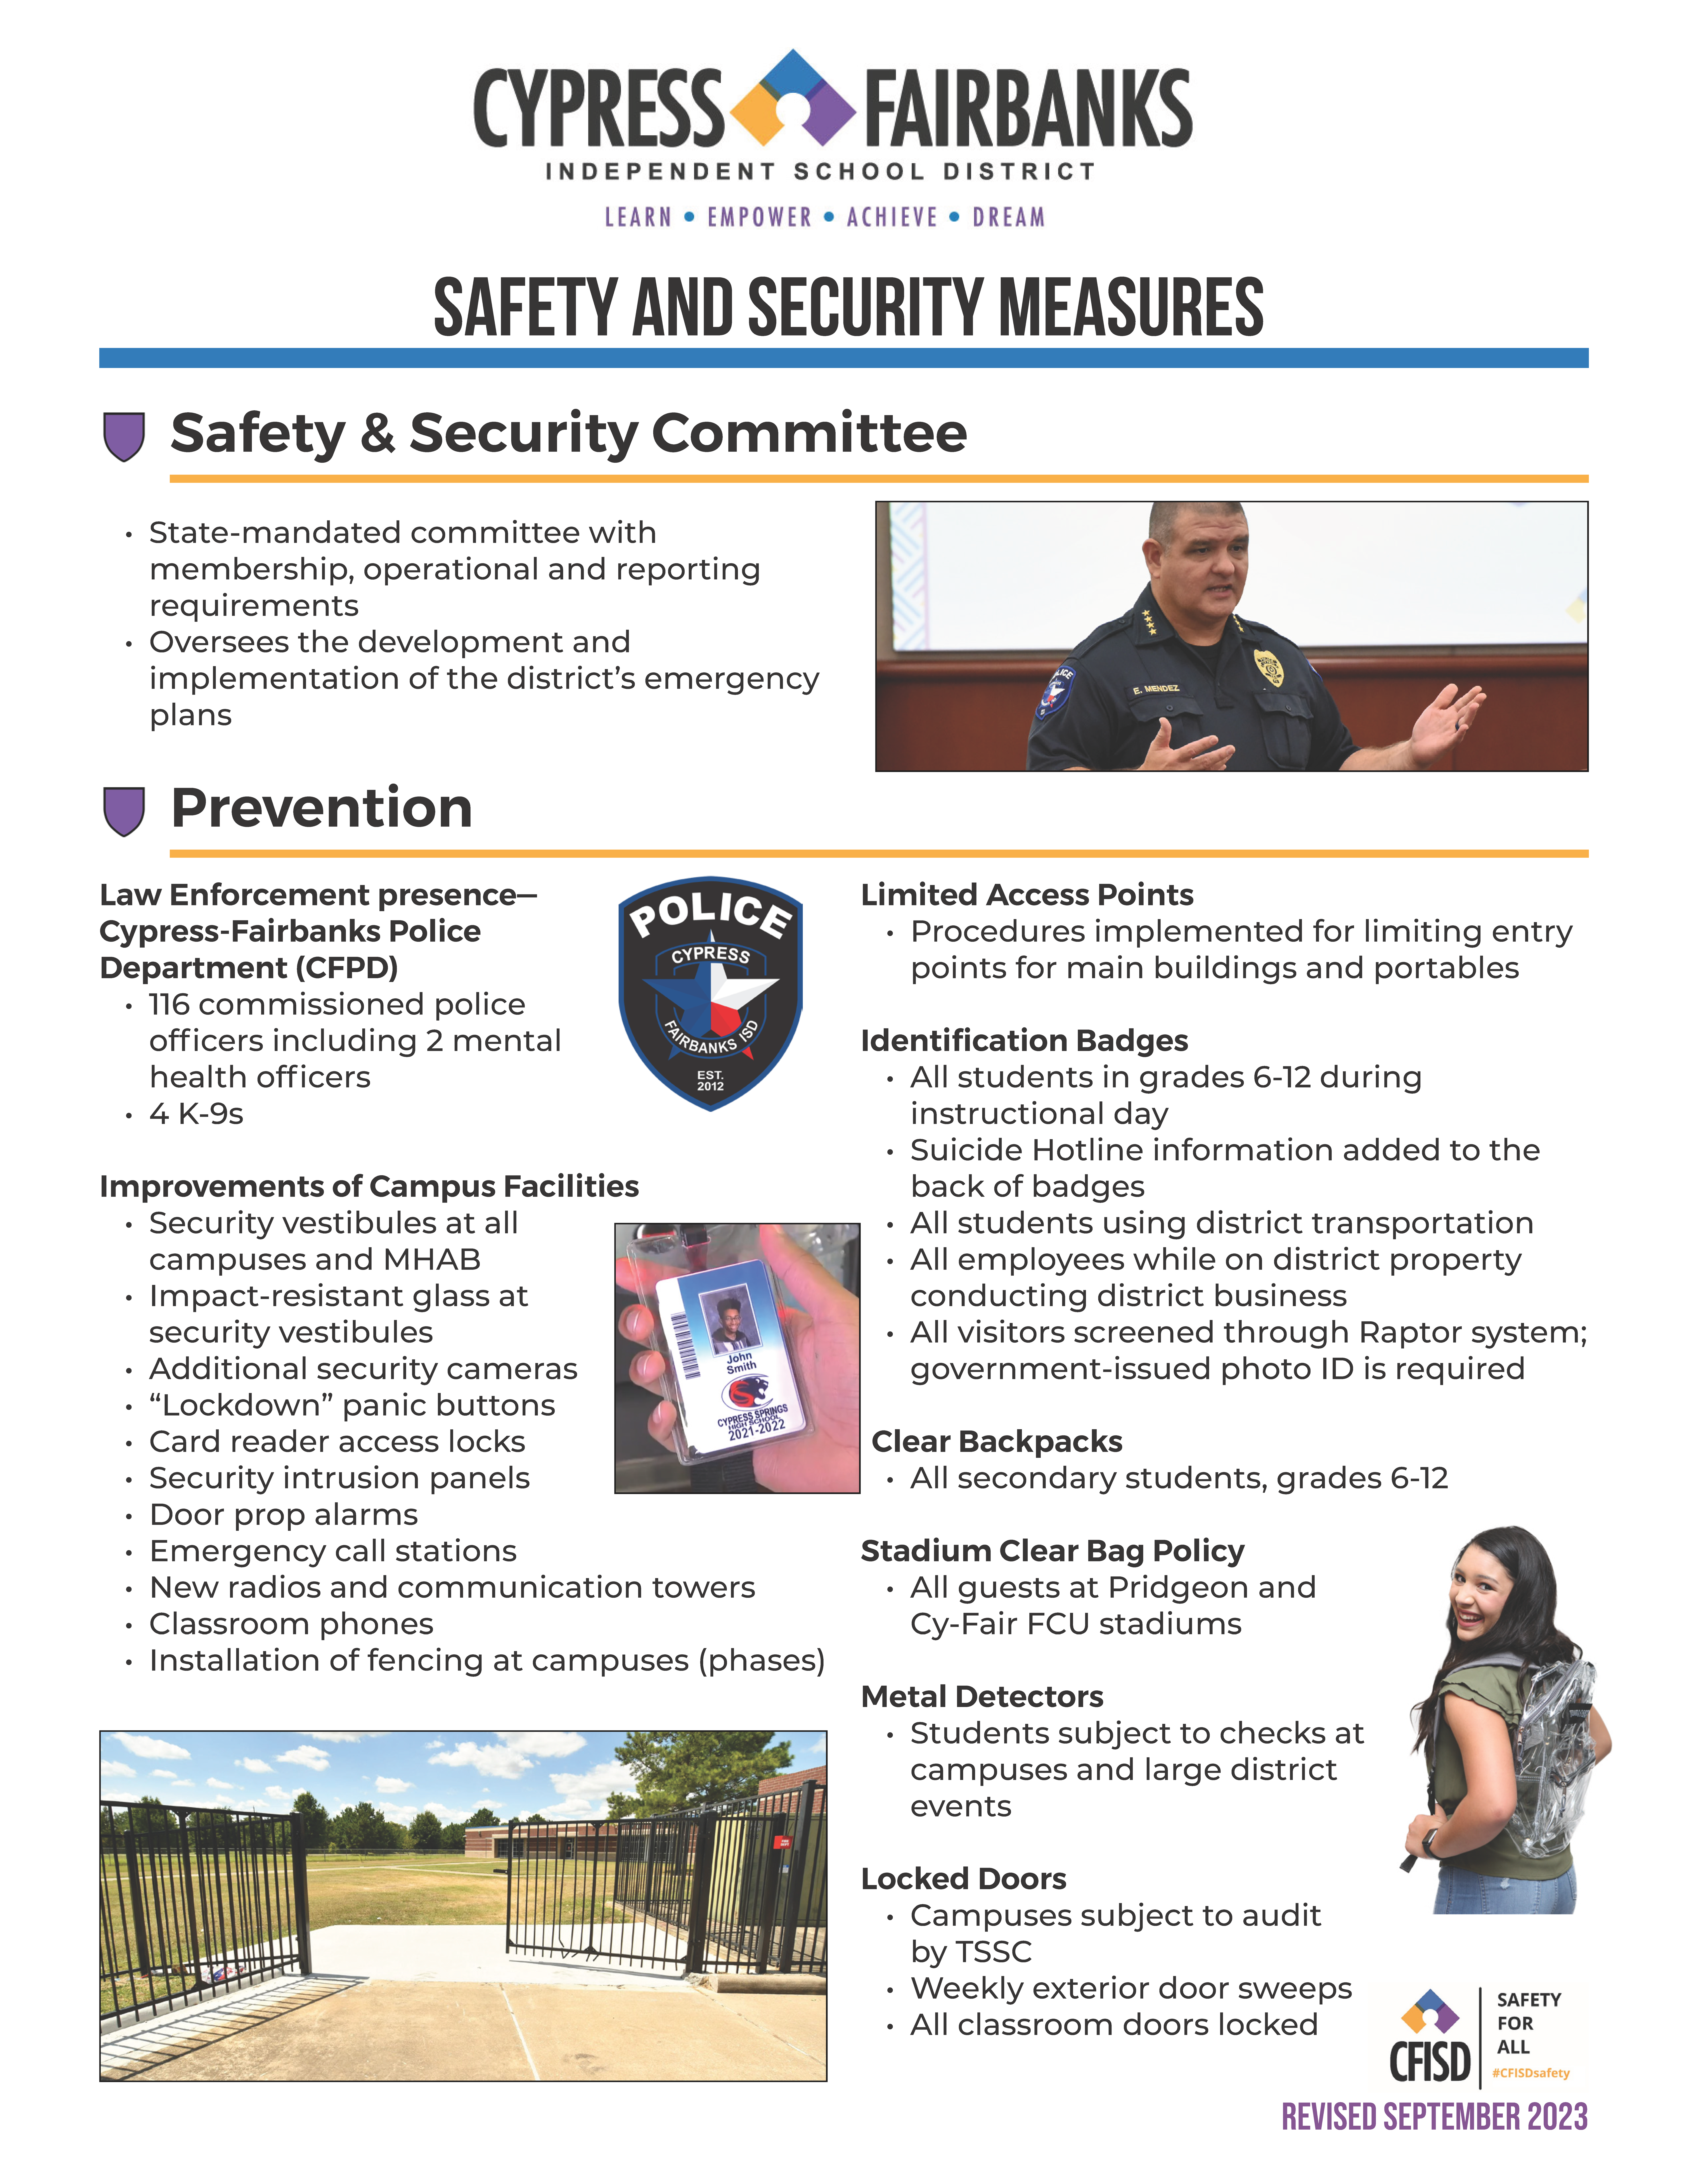 Safety and security measures overview